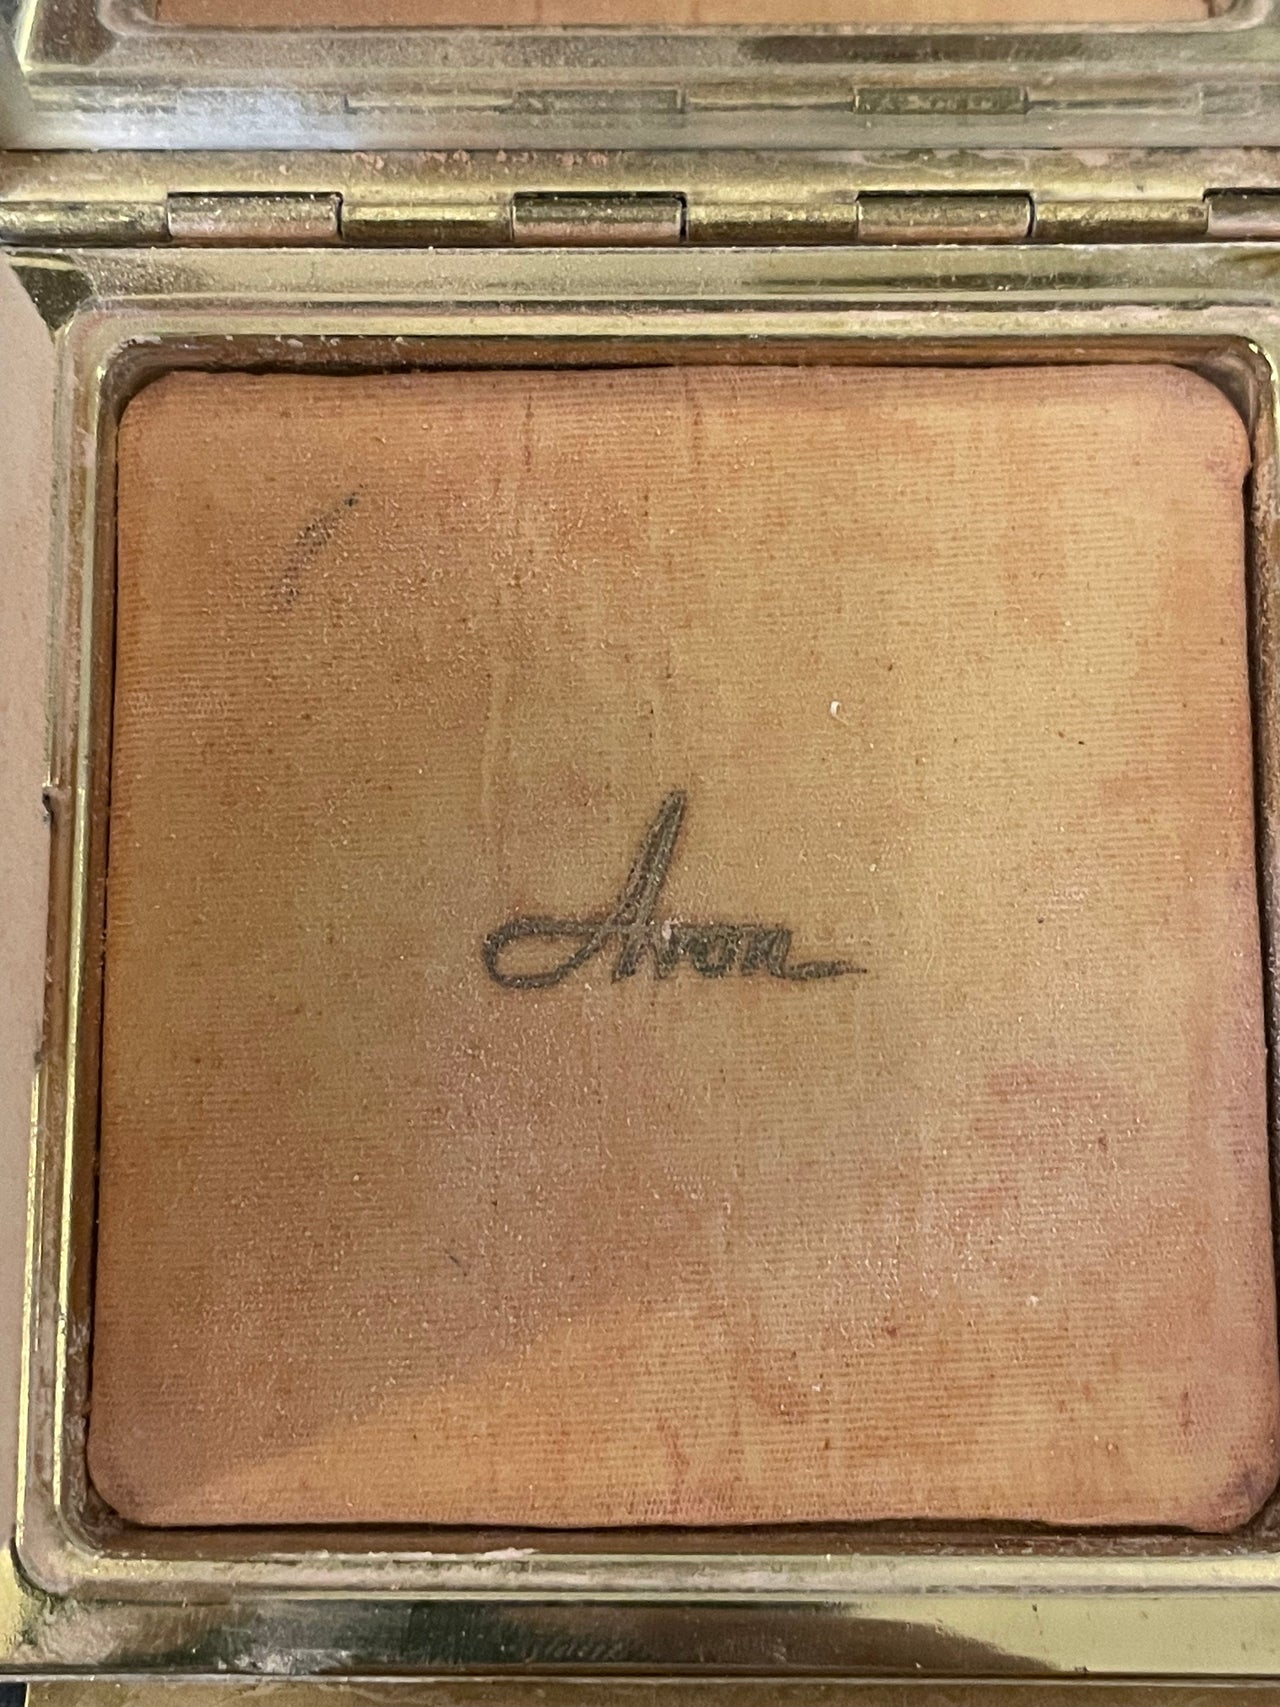 Gold Avon Compact with Stripes and Filigree Bloomers and Frocks 